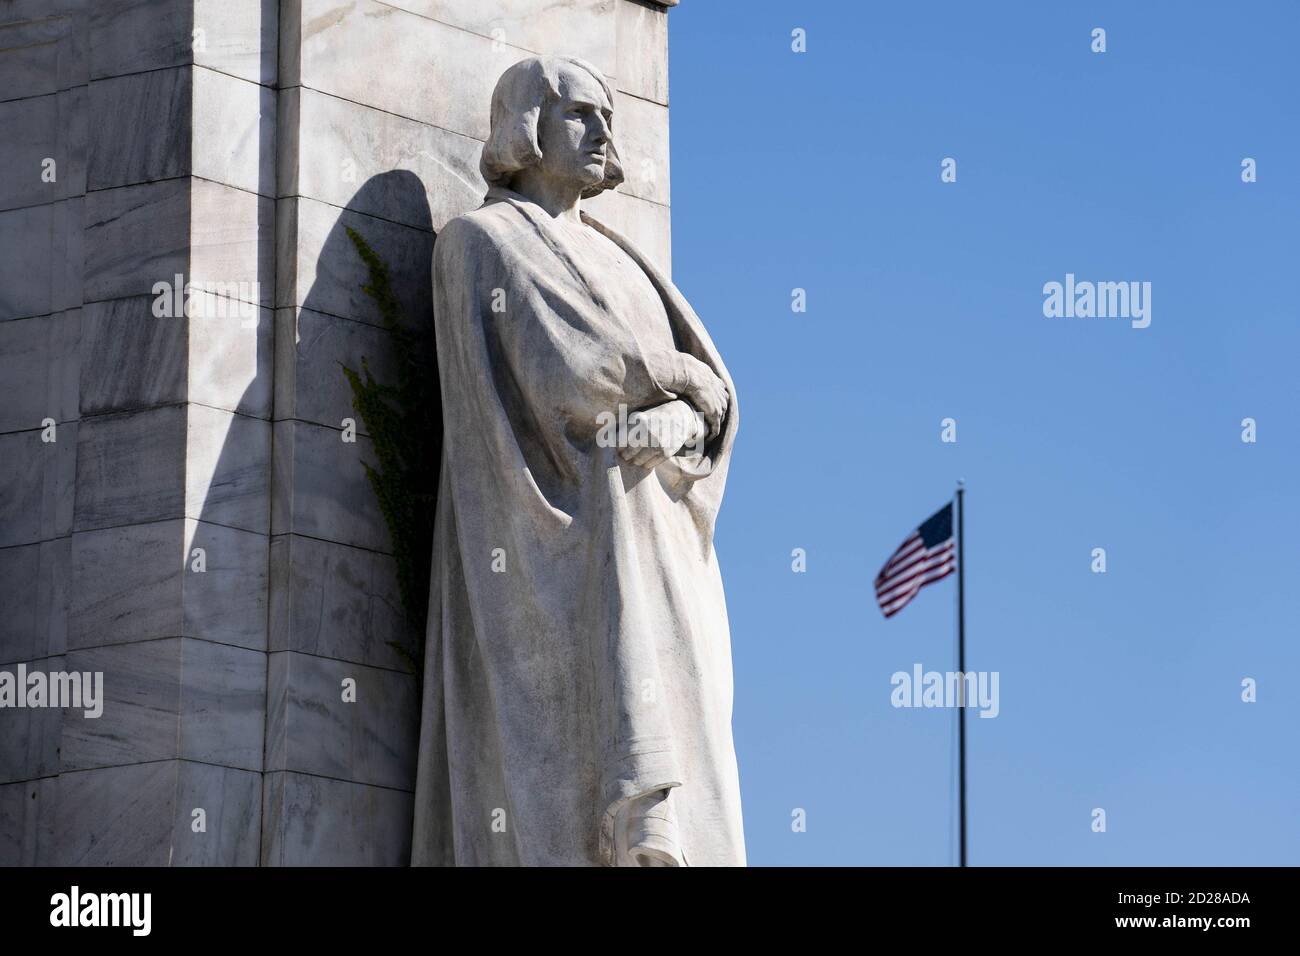 Washington, United States. 06th Oct, 2020. A statue of Christopher Columbus is seen standing in front of Union Station in Washington, DC, U.S., on Tuesday, Oct. 6, 2020. Photo by Sarah Silbiger/UPI Credit: UPI/Alamy Live News Stock Photo